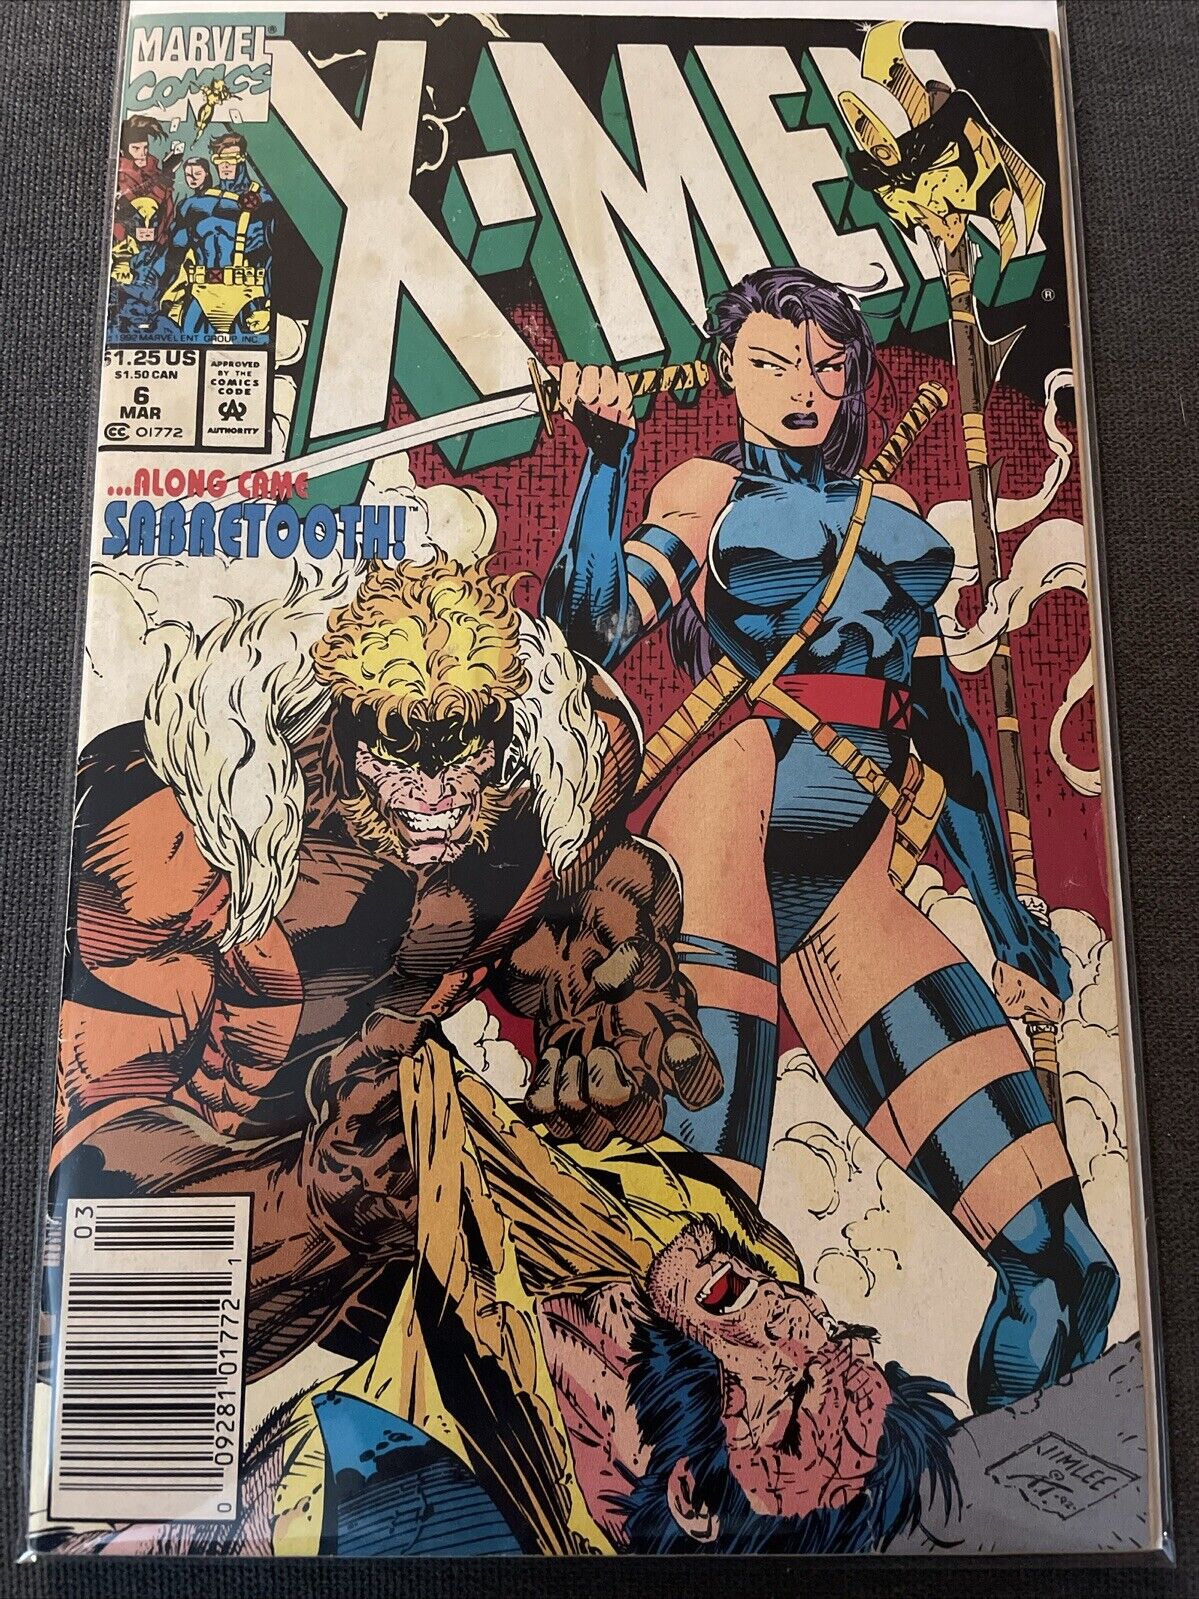 Marvel - X-MEN #6 (Good Condition) bagged and boarded